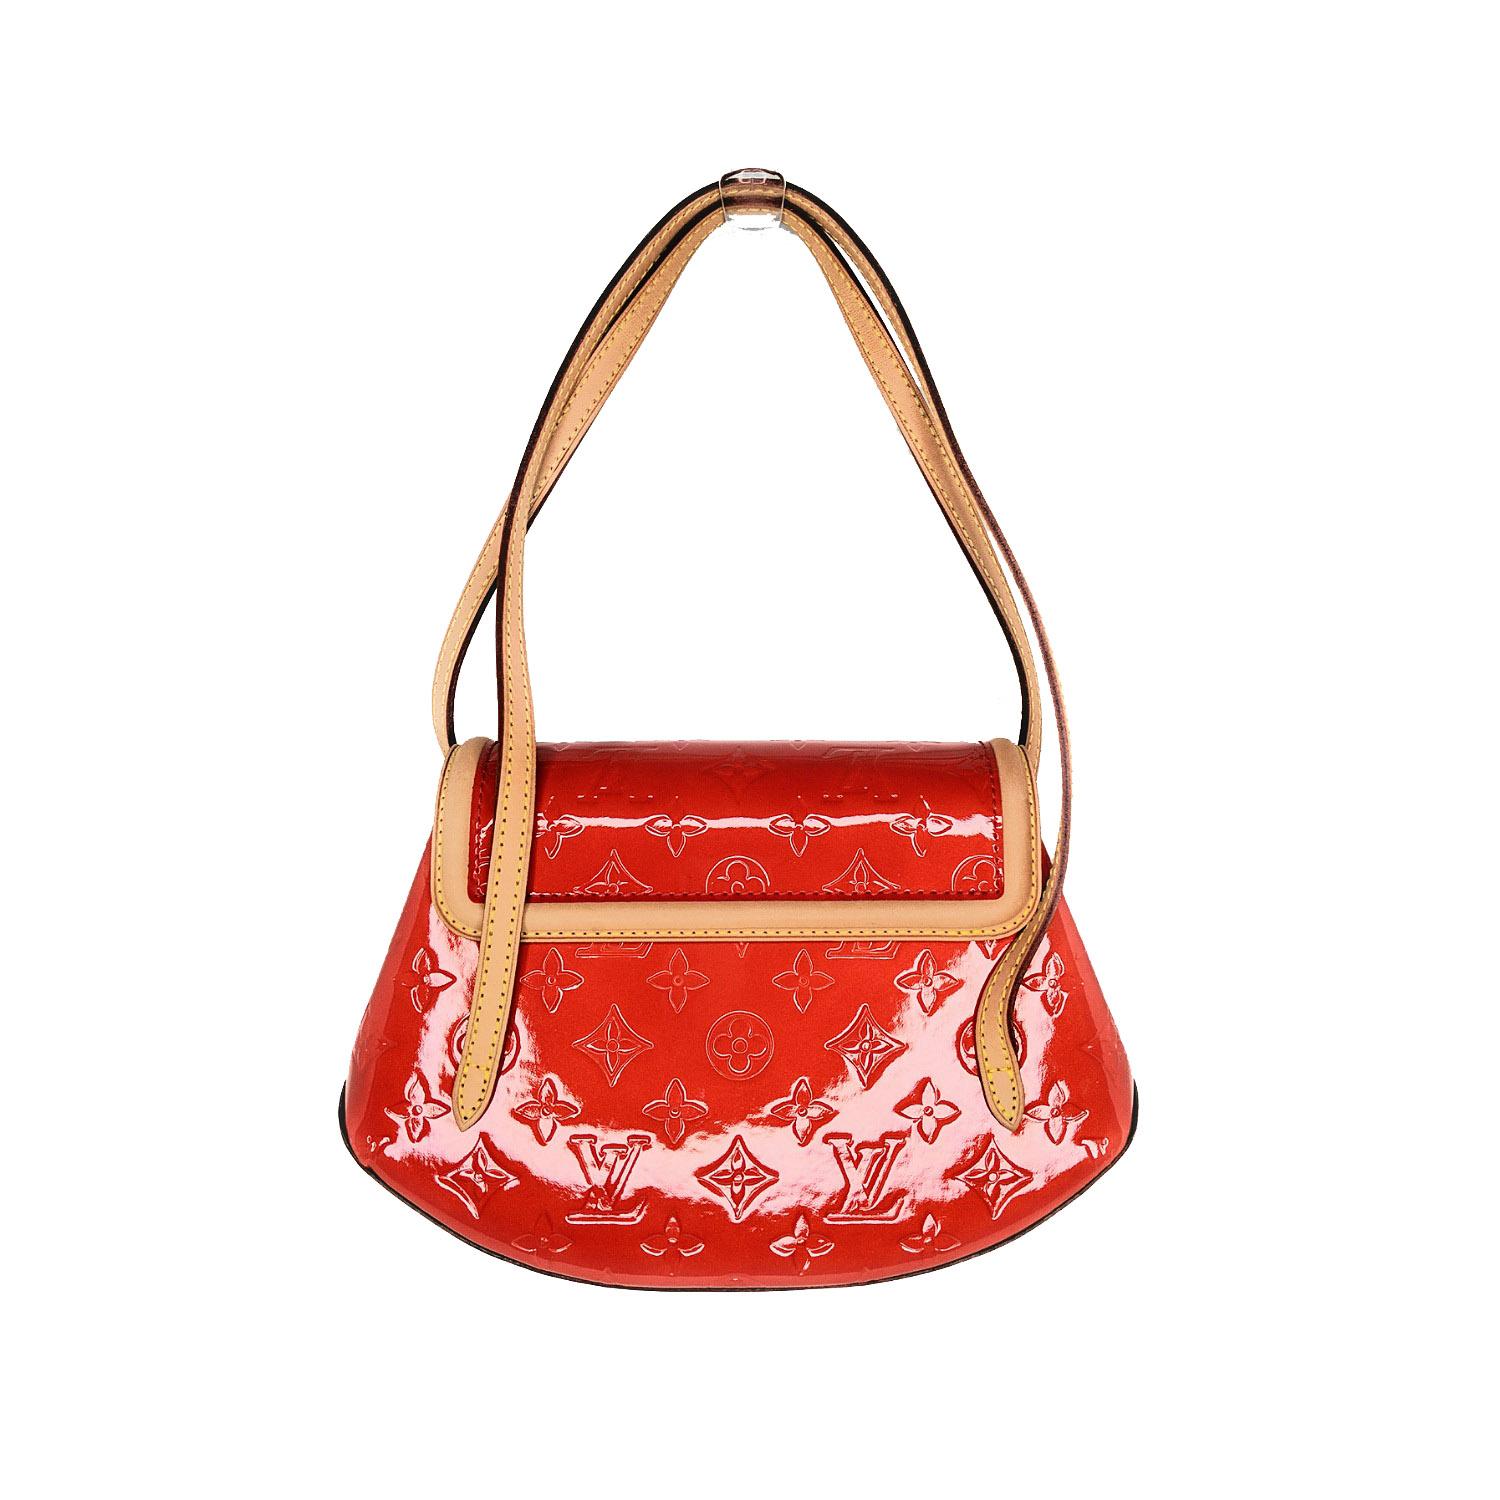 Be a shining star with this beautiful and rare Louis Vuitton Biscayne Bay PM bag and seize the opportunity to get this hard to find red color. It's fun and unique shape features long natural cowhide shoulder straps, trim and bottom which provide a